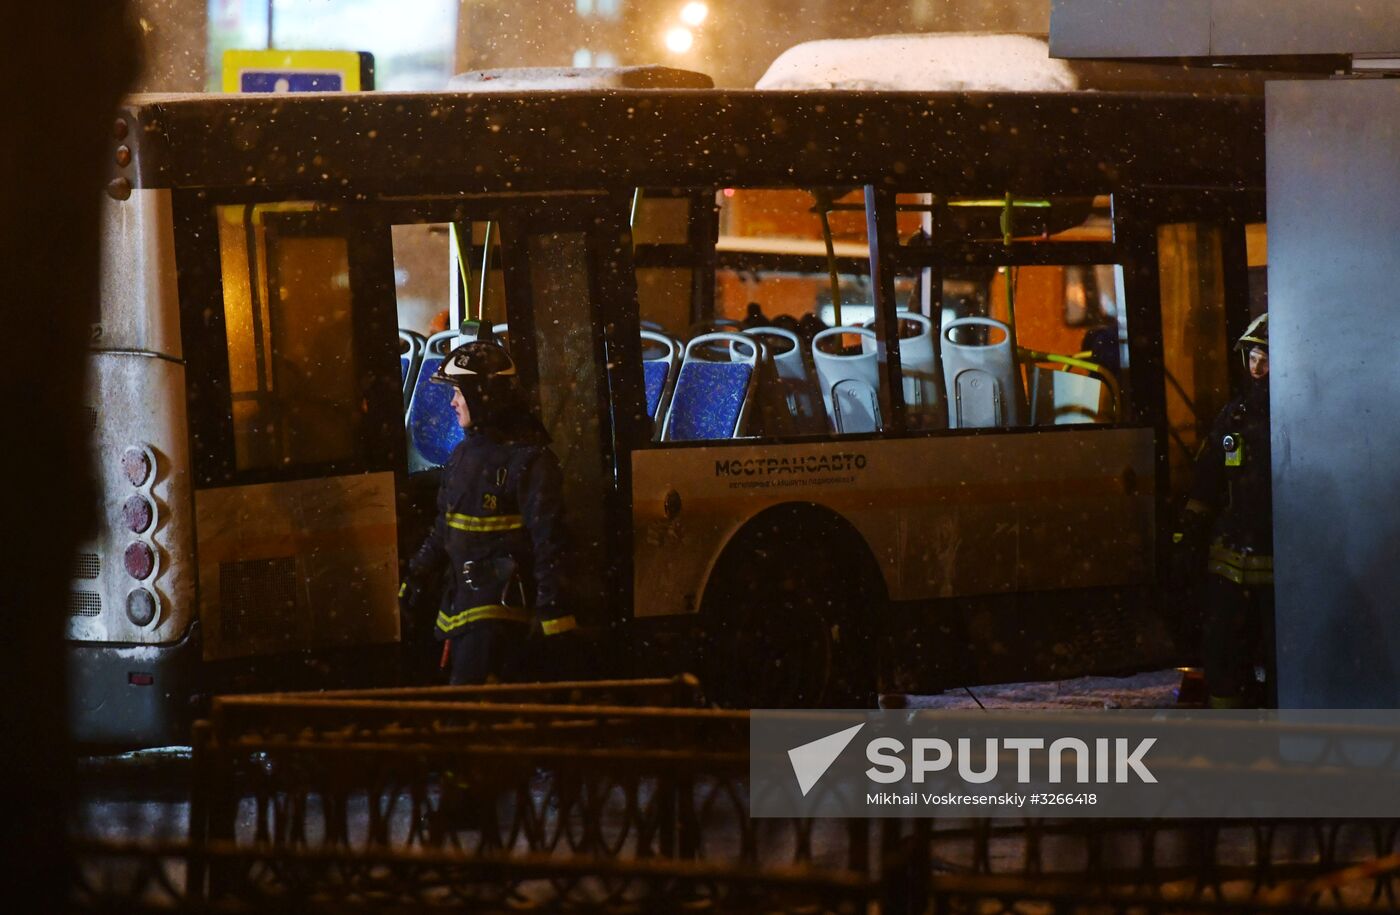 Bus went into underpass in the west of Moscow